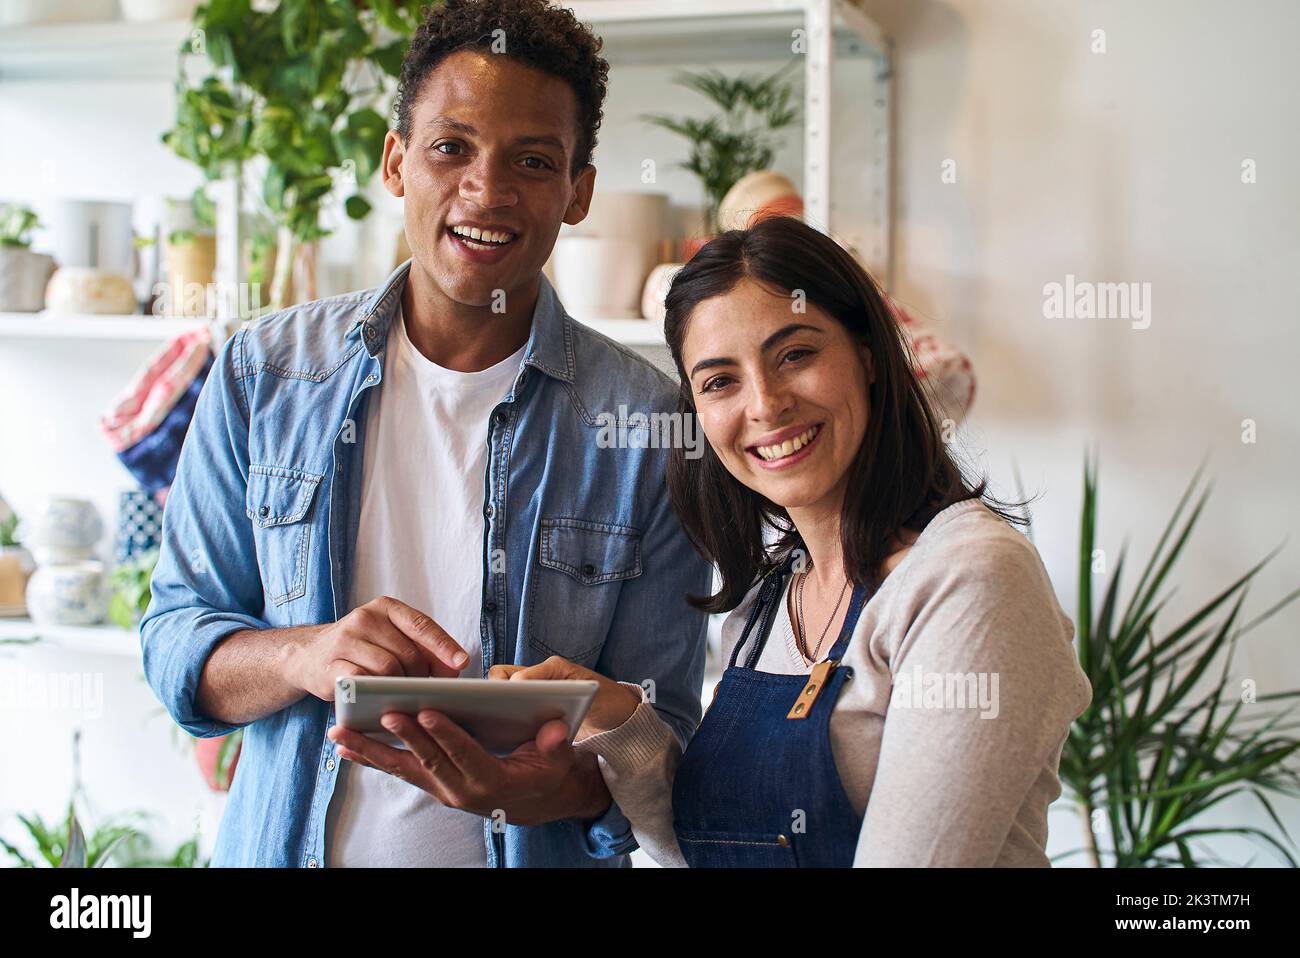 Plant nursery owners smiling at the camera while using digital tablet Stock Photo